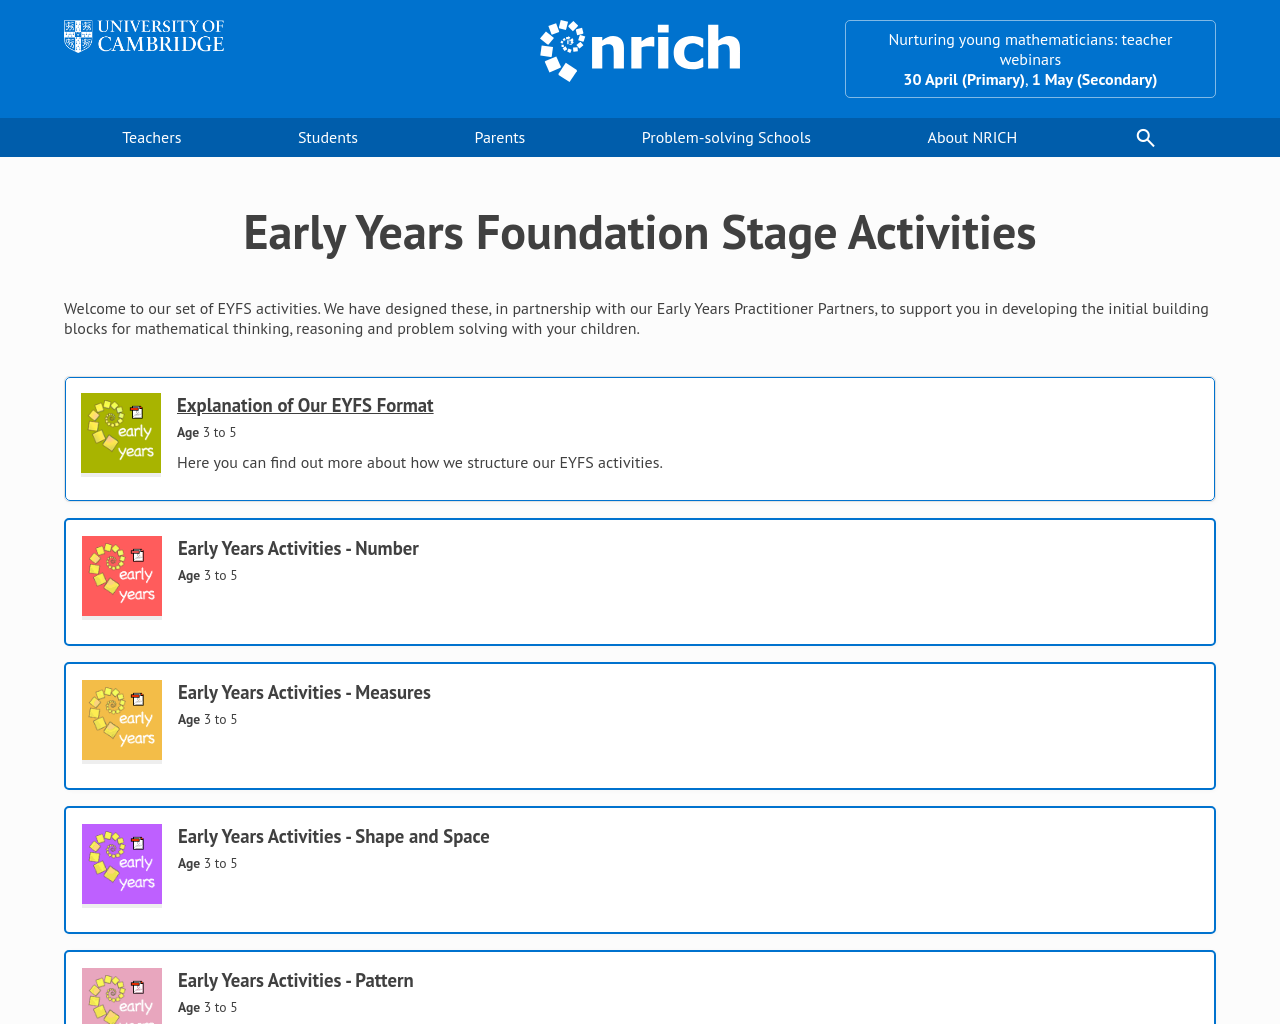 Early Years Activities